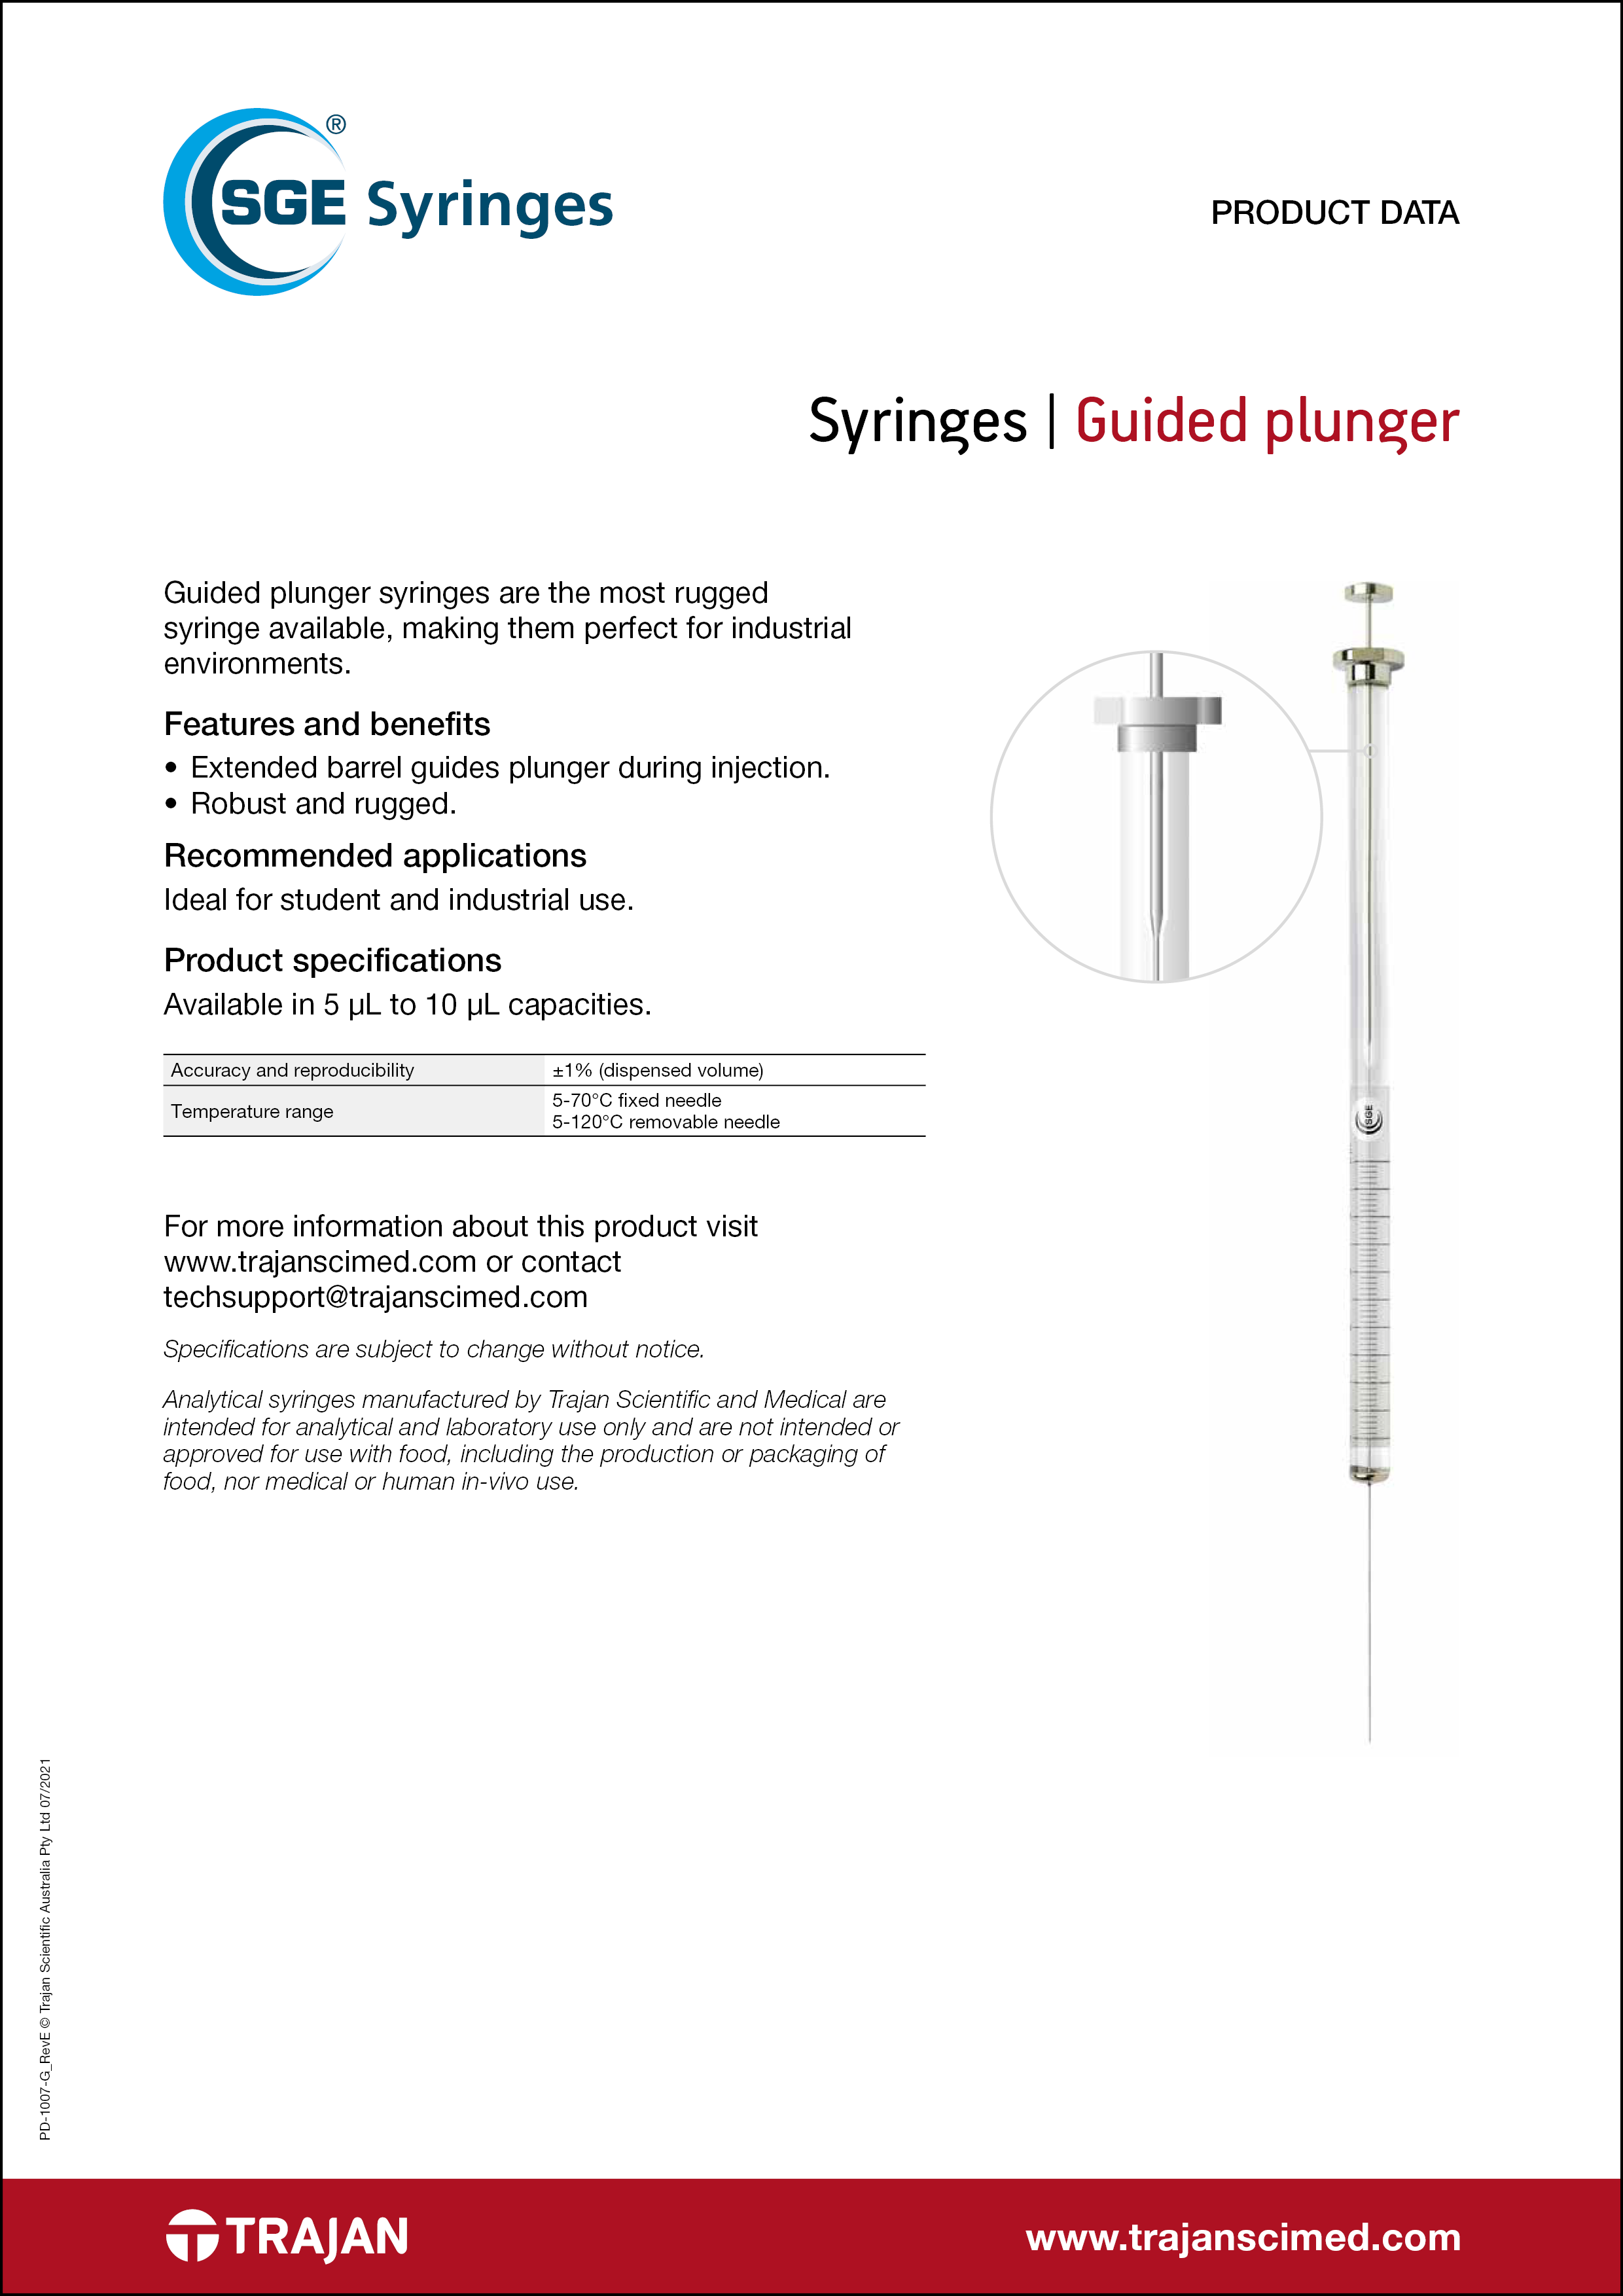 Product Data Sheet - SGE guided plunger syringes